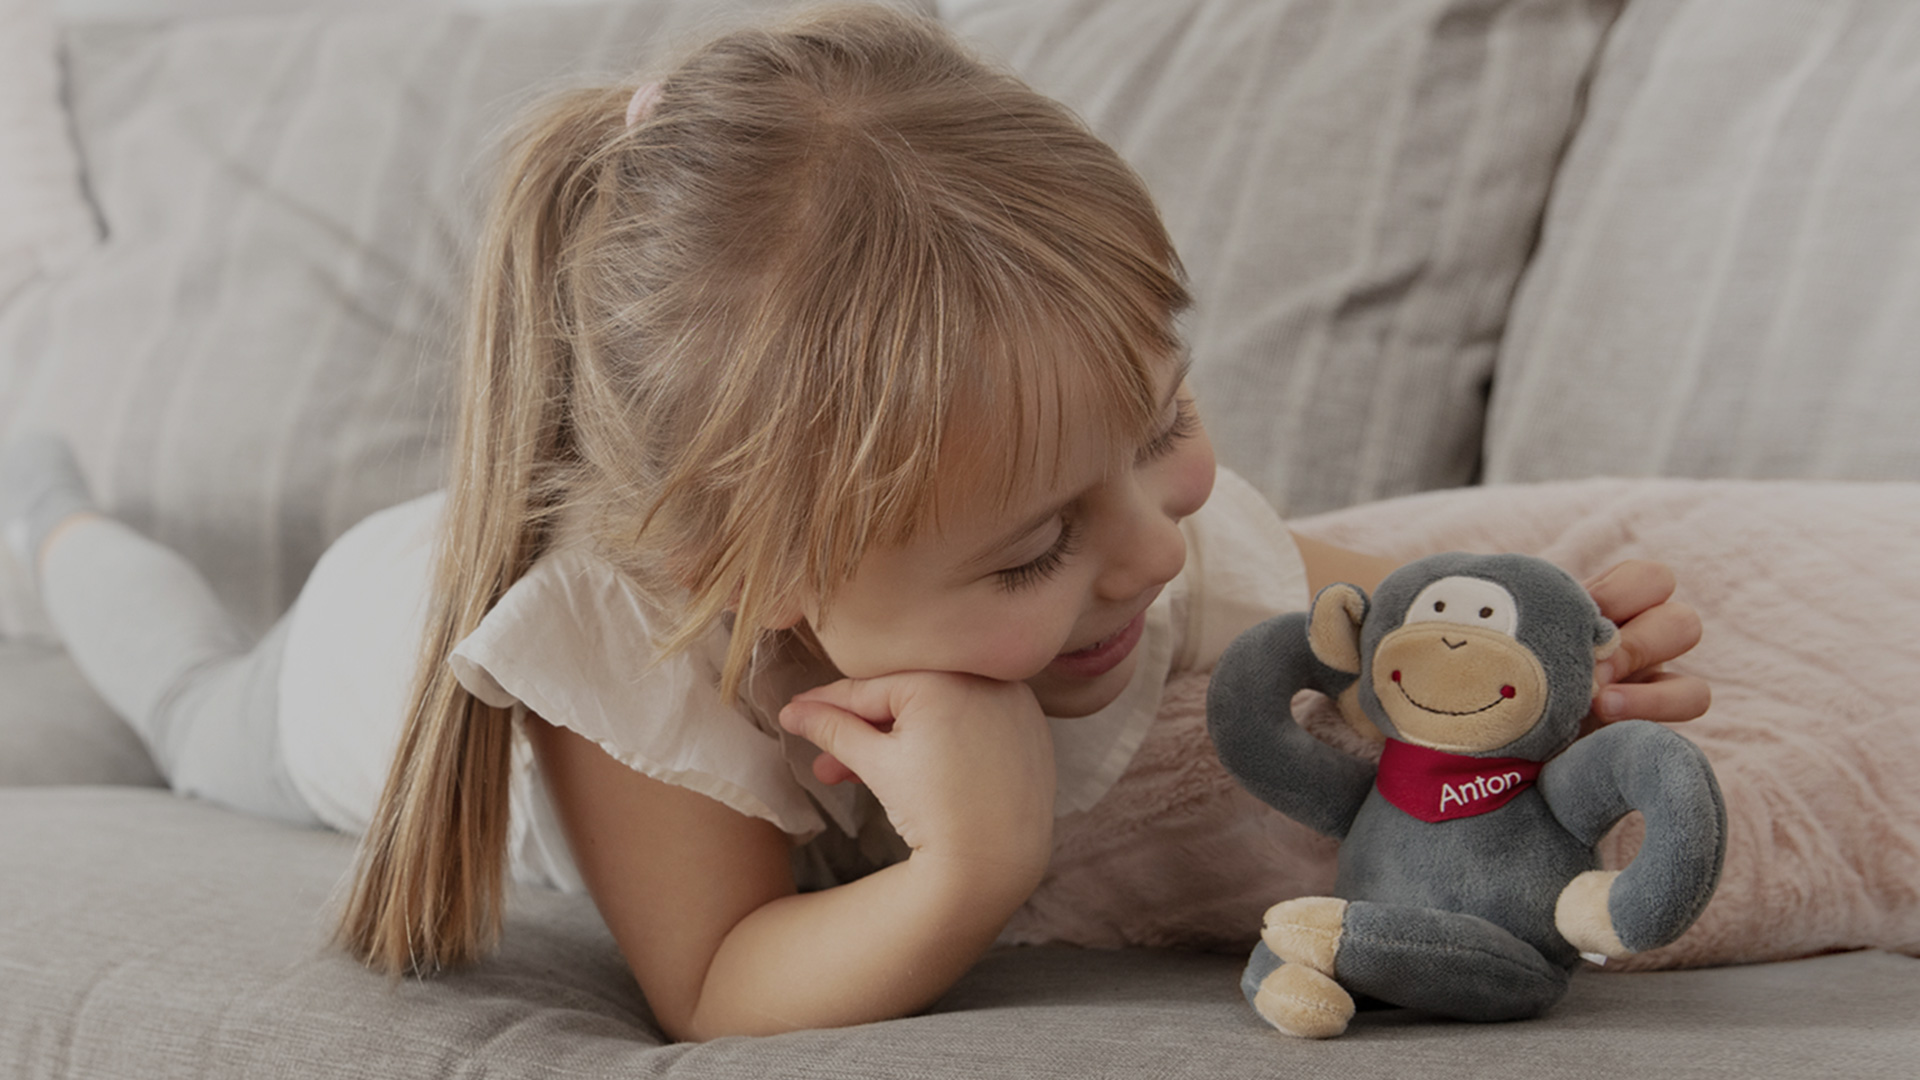 Blonde girl is playing with stuffed animal Anton on the sofa